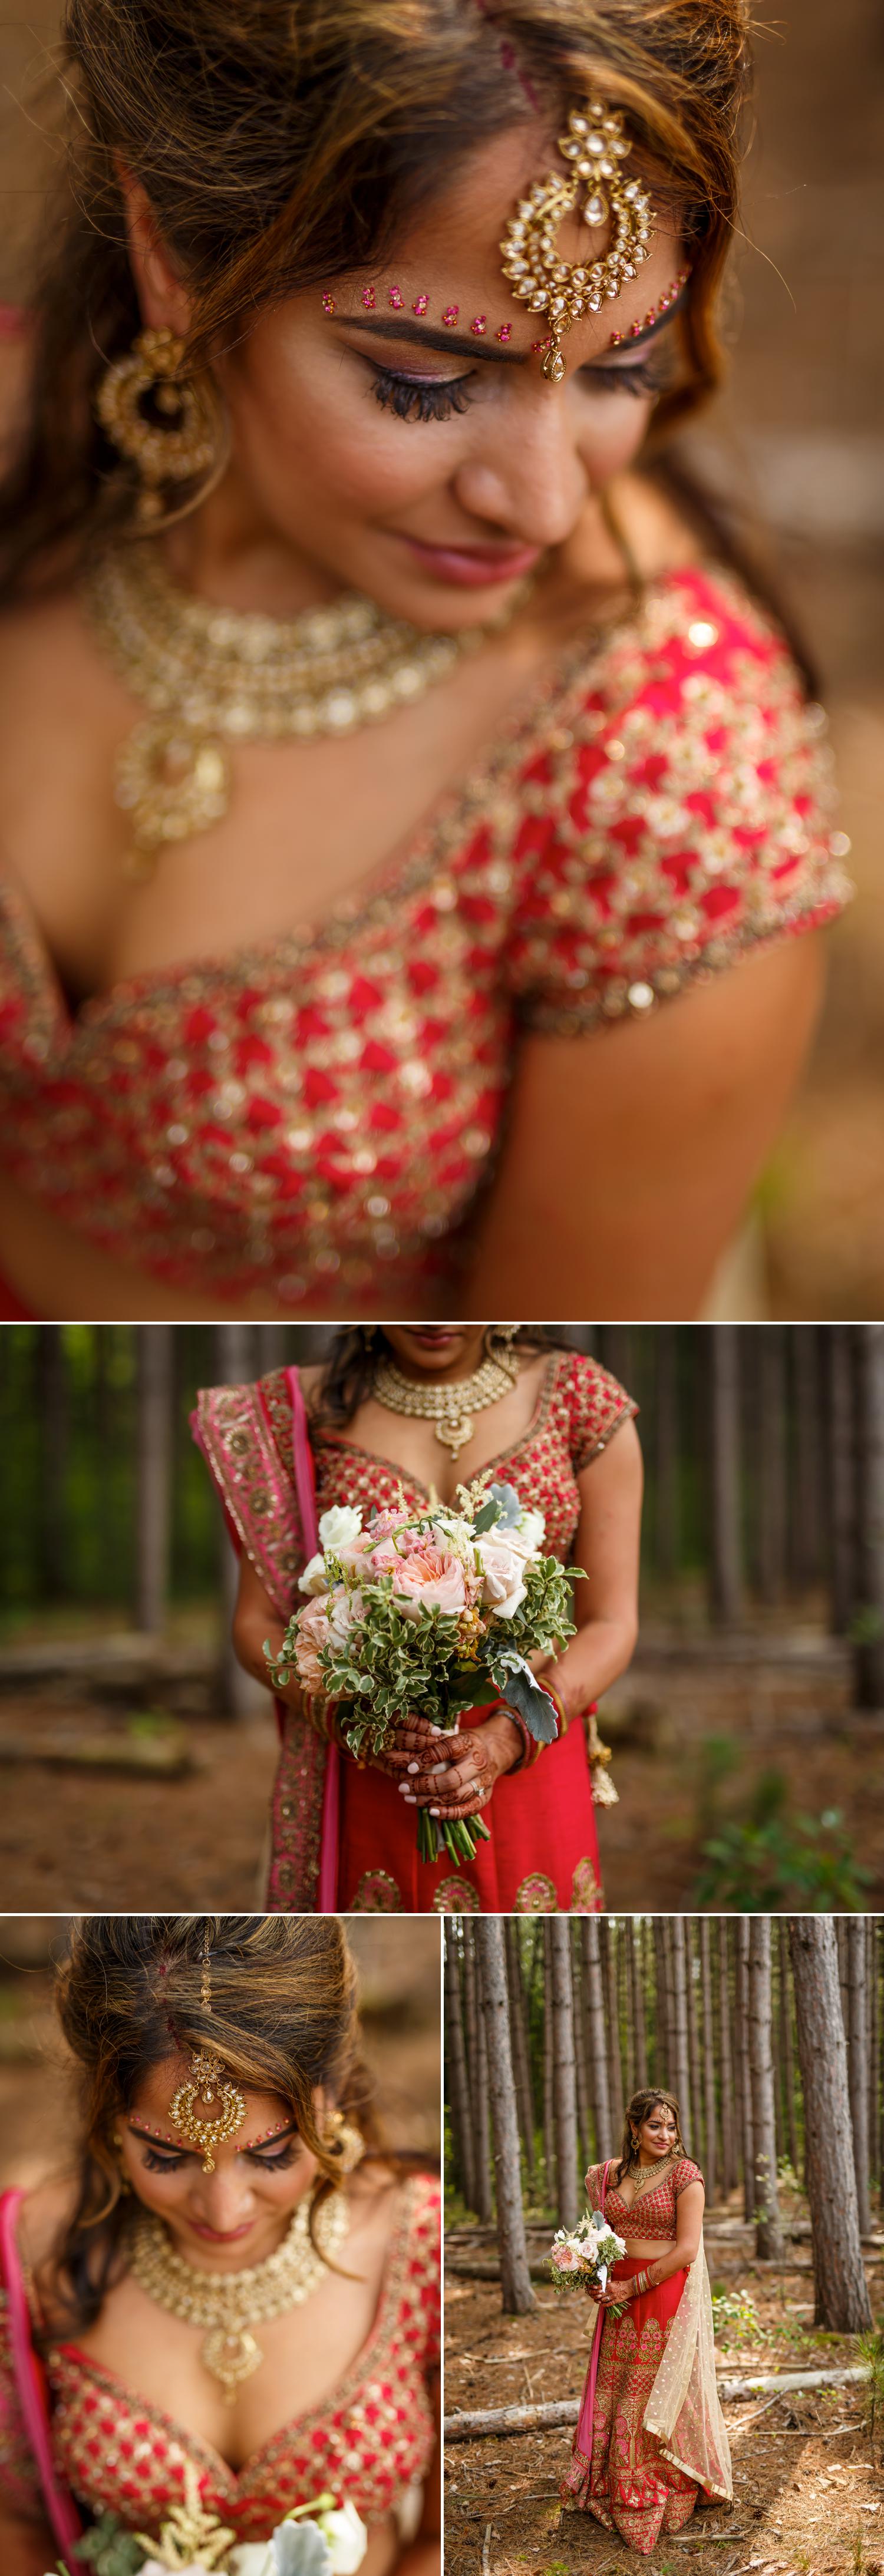 photos of an indian bride in ottawa